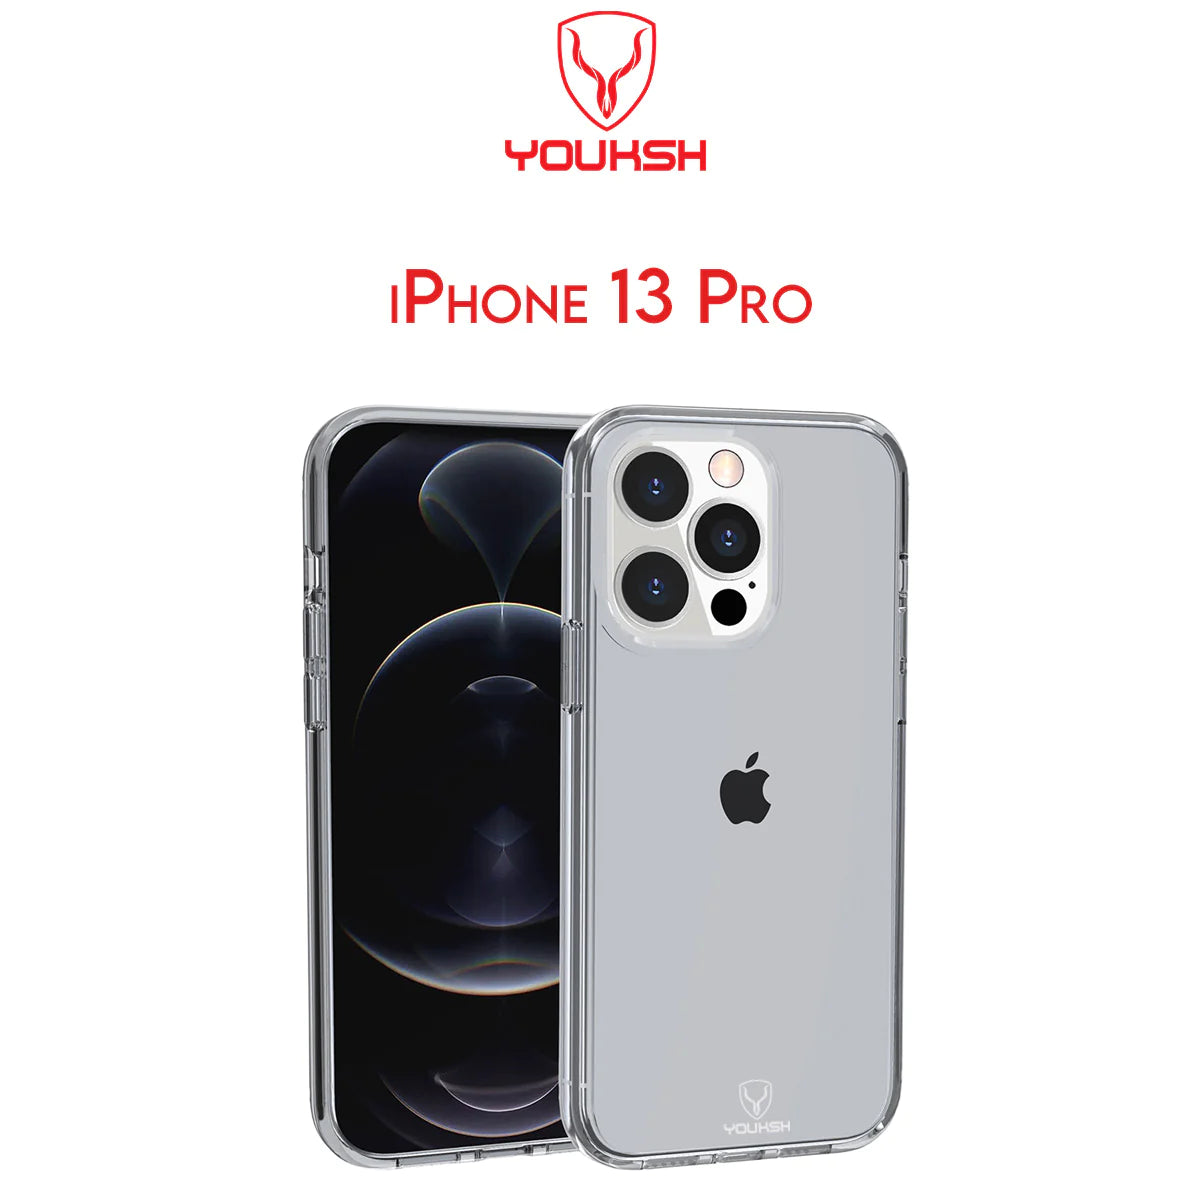 YOUKSH Apple iPhone 13/13 Pro Transparent Case | Soft Shock Proof Jelly Cover